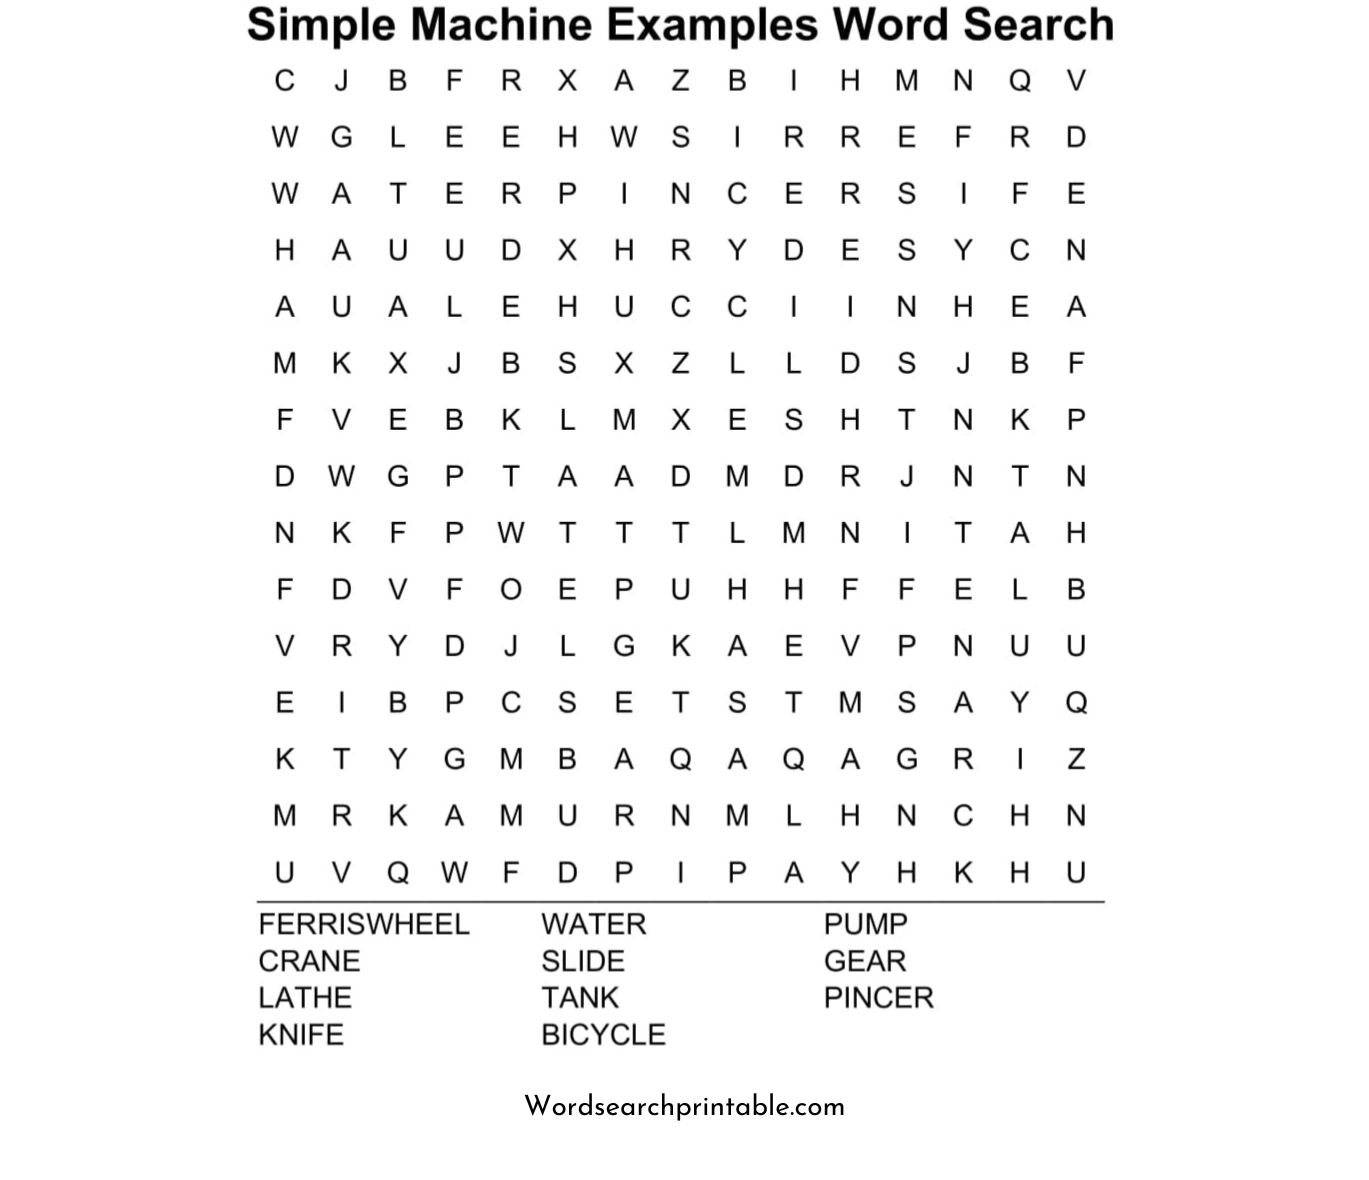 simple machine examples word search puzzle